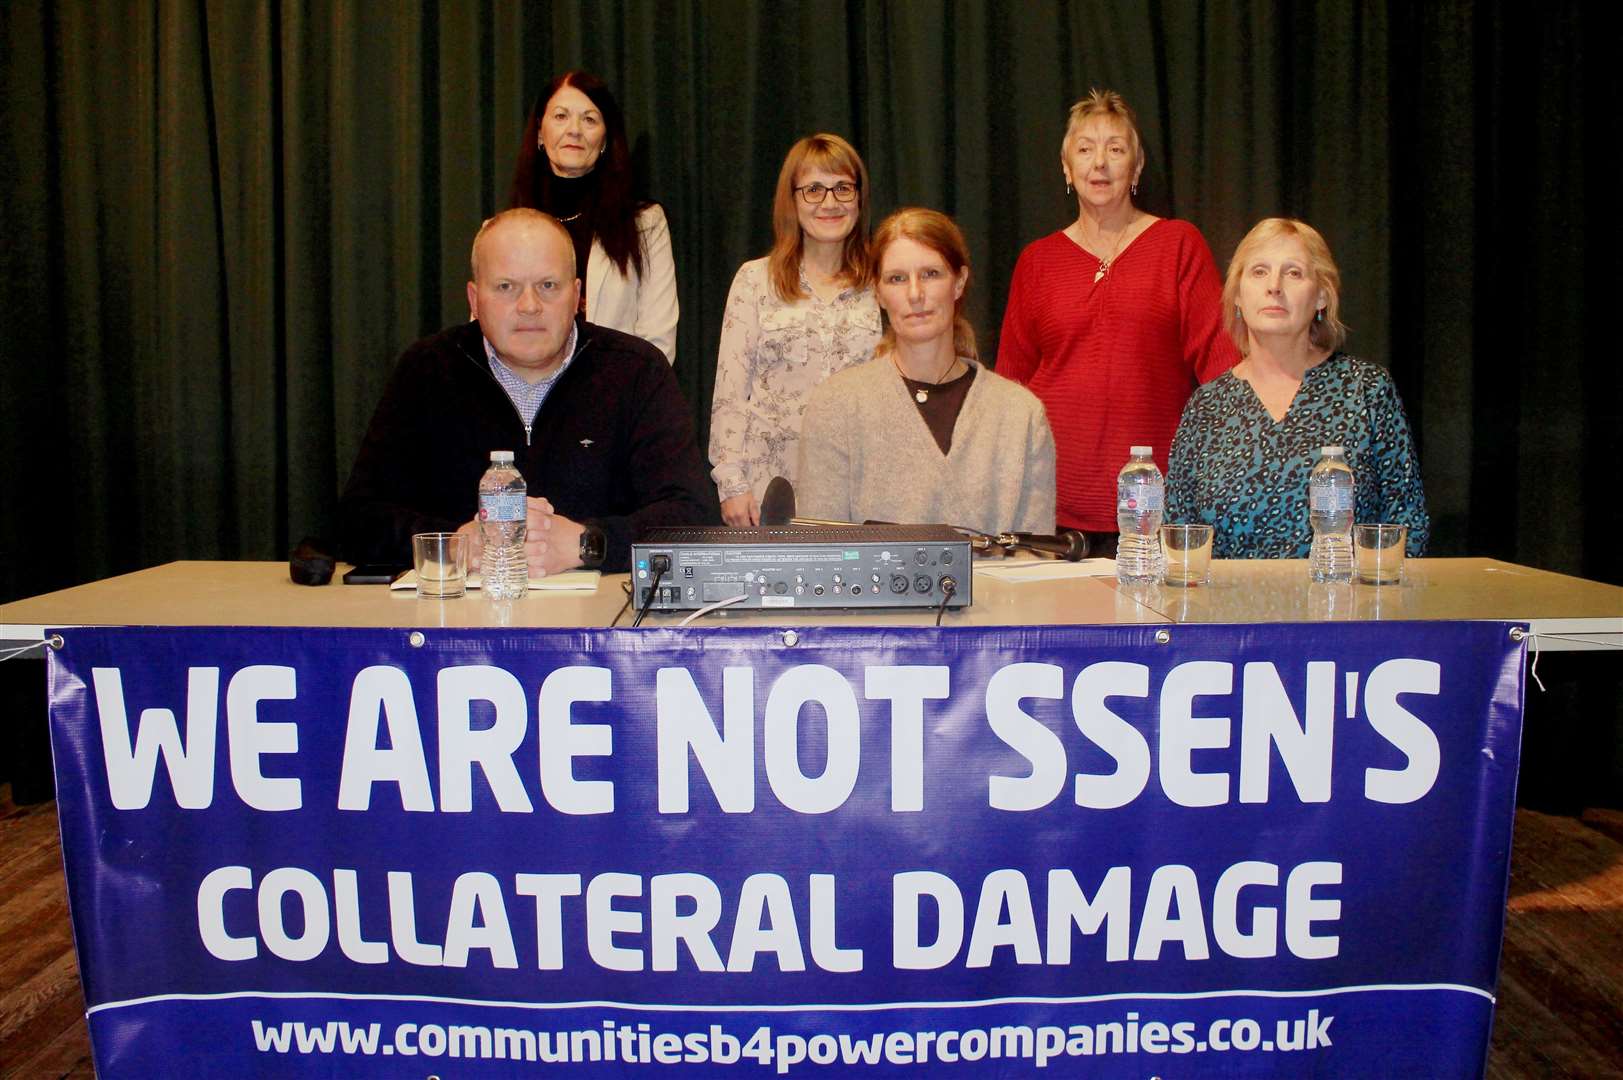 CB4PC representatives Denise Davis and Lyndsey Ward (seated) at a meeting in Dunbeath last September organised by Dunbeath/Berriedale Community Say NO to Pylons, under the umbrella of Berriedale and Dunbeath Community Council. Picture: Alan Hendry